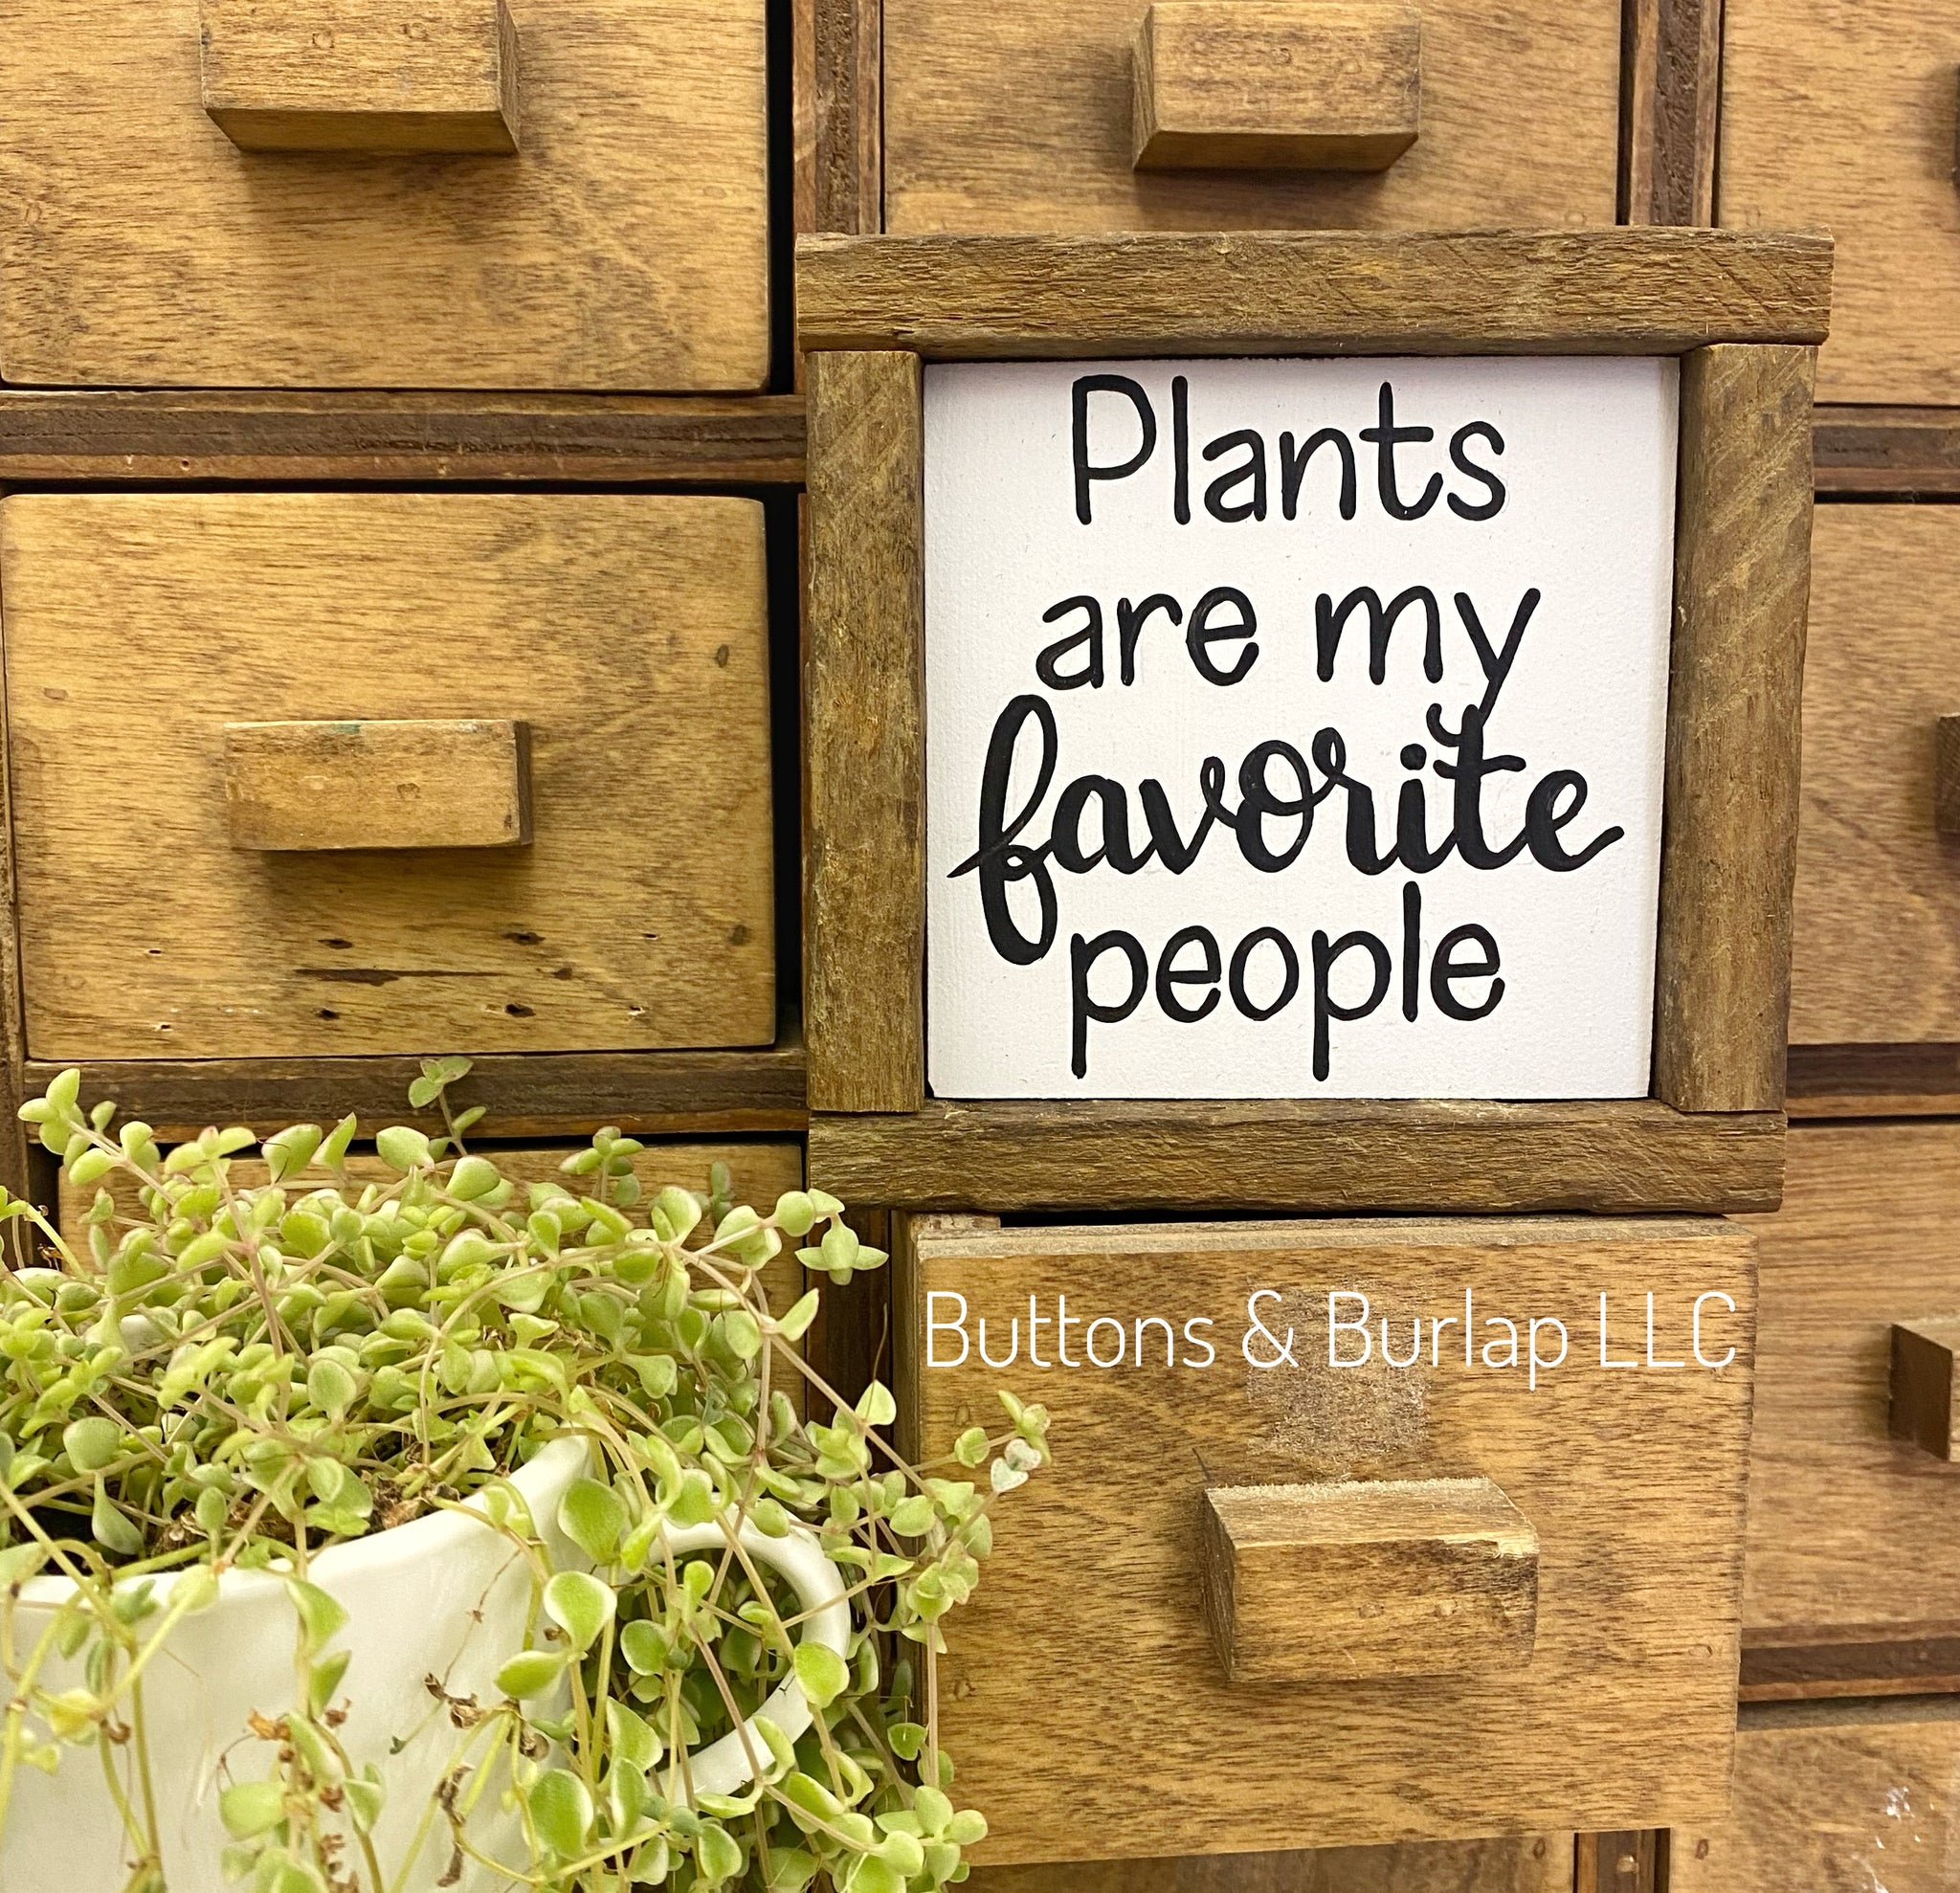 Plants are my favorite people